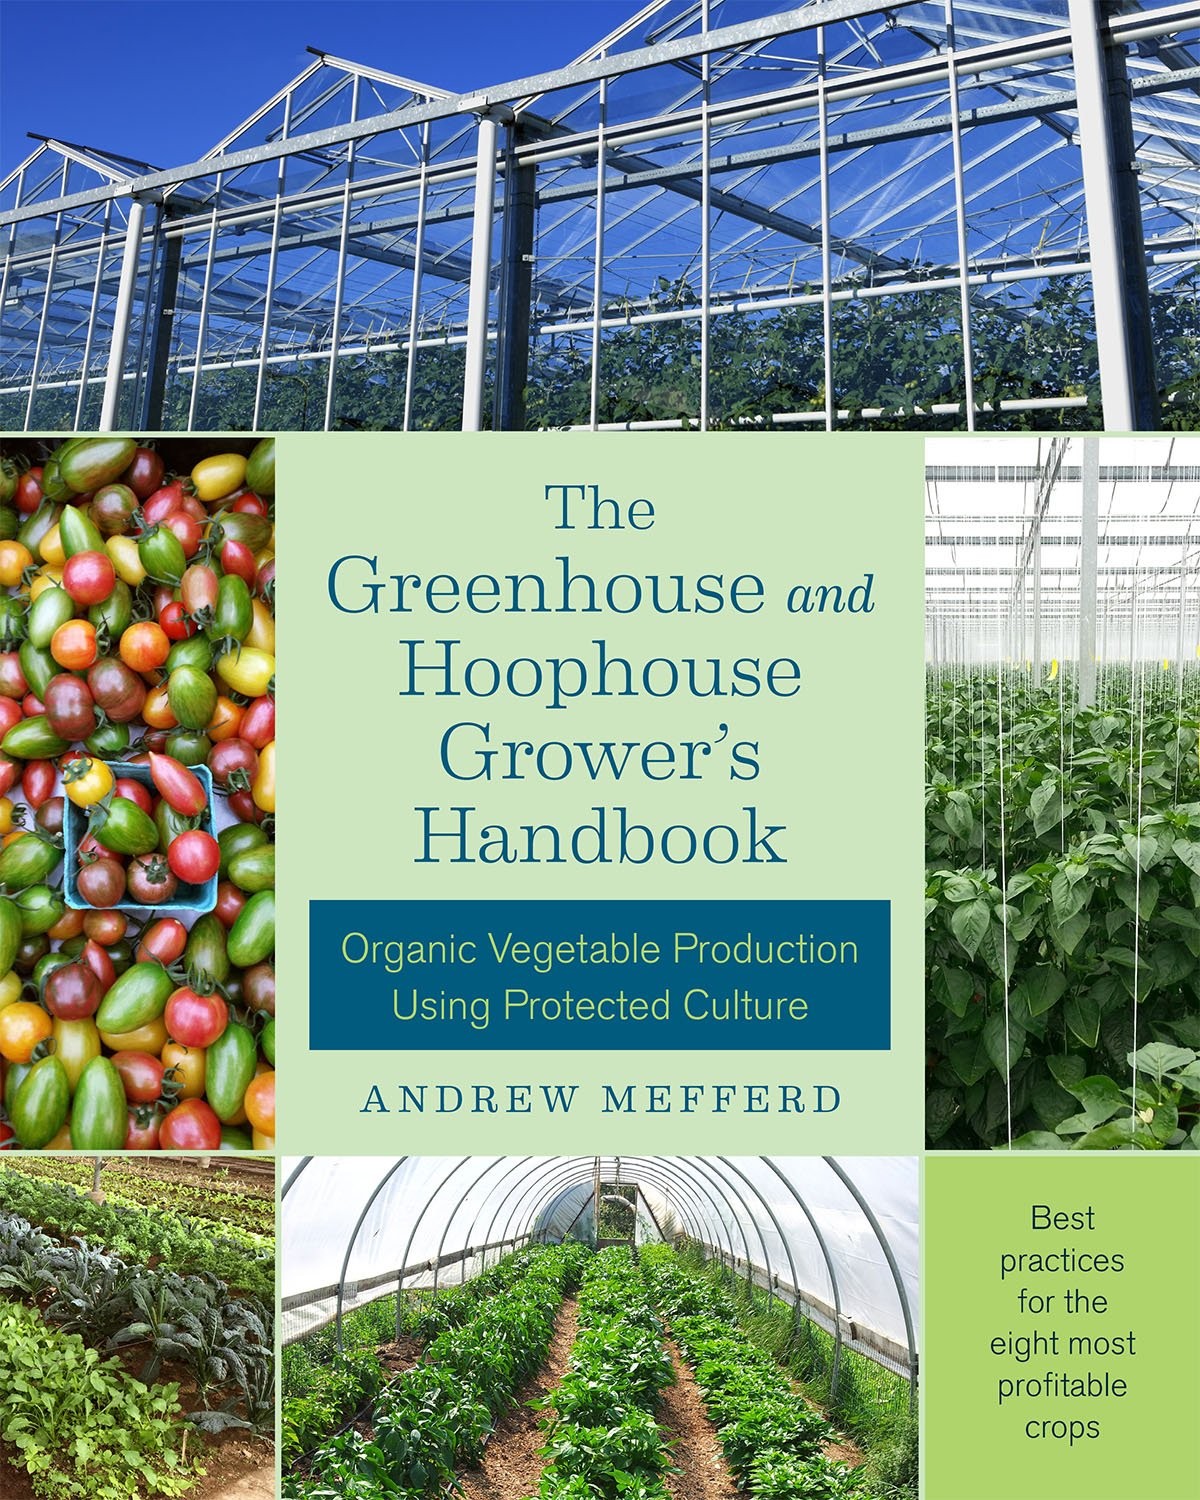 Greenhouse-tips-for-hoophouse-growers